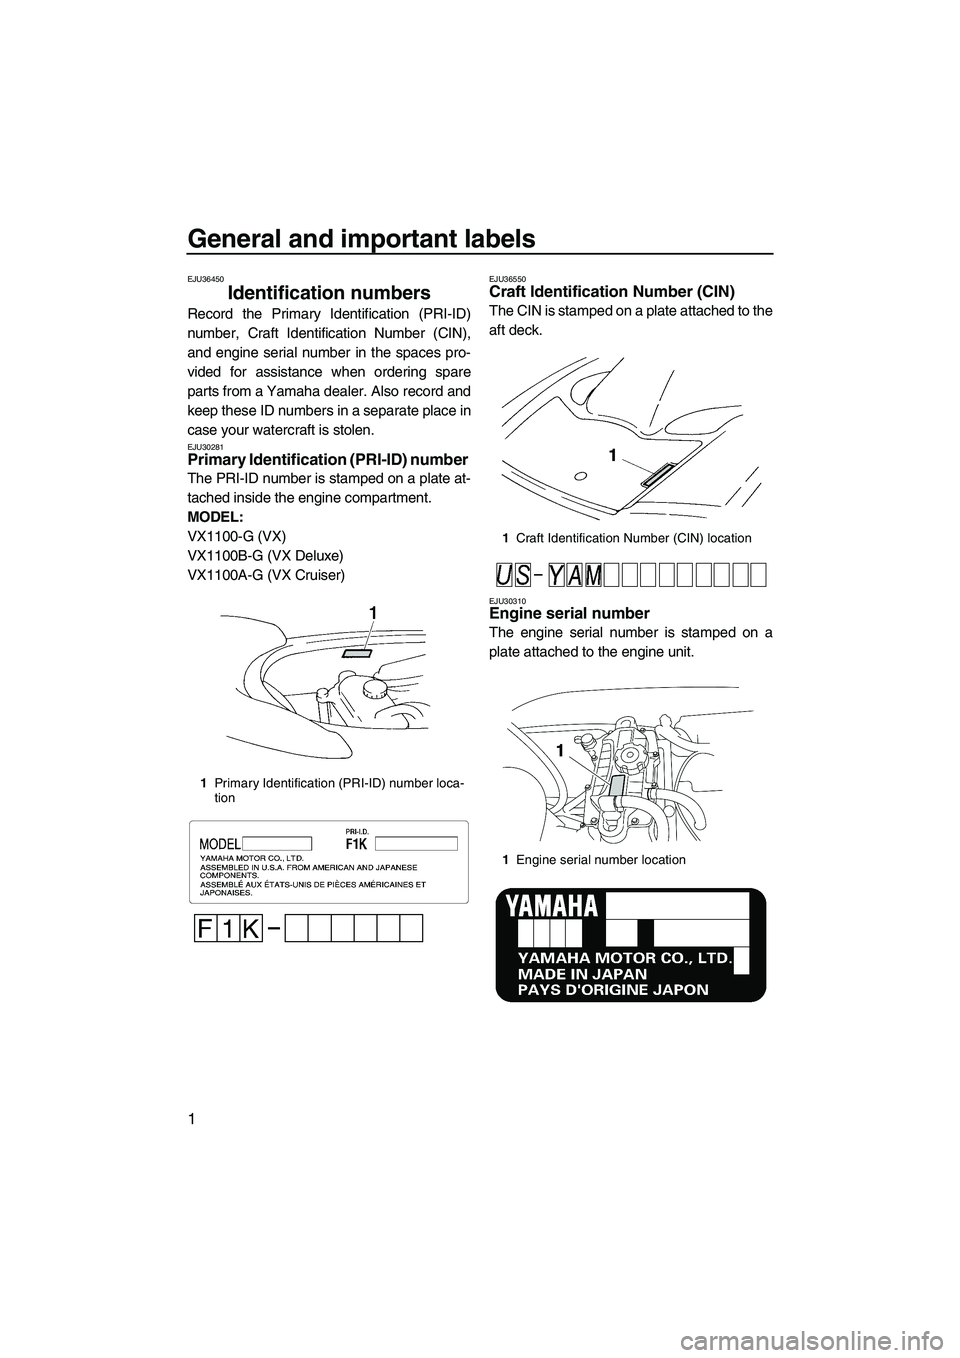 YAMAHA VX 2008  Owners Manual General and important labels
1
EJU36450
Identification numbers 
Record the Primary Identification (PRI-ID)
number, Craft Identification Number (CIN),
and engine serial number in the spaces pro-
vided 